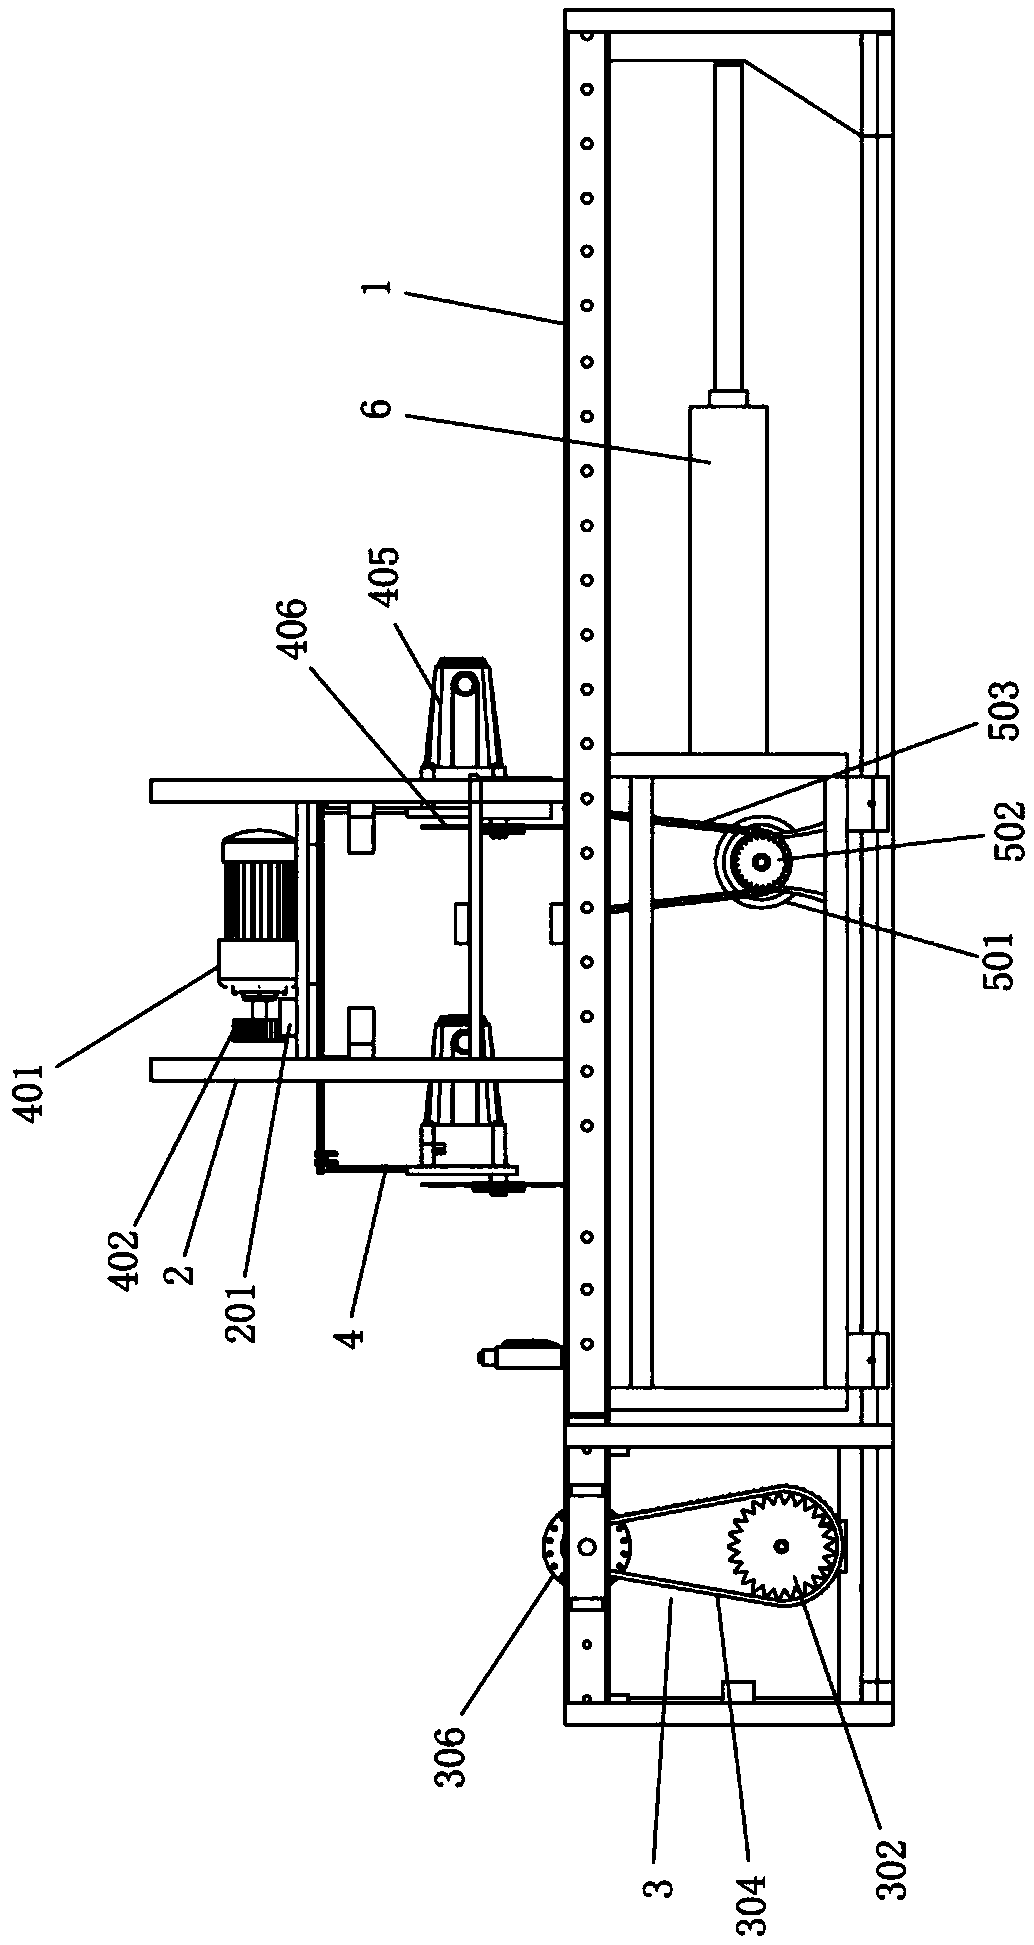 Intelligent cutting device for processing of MCM materials